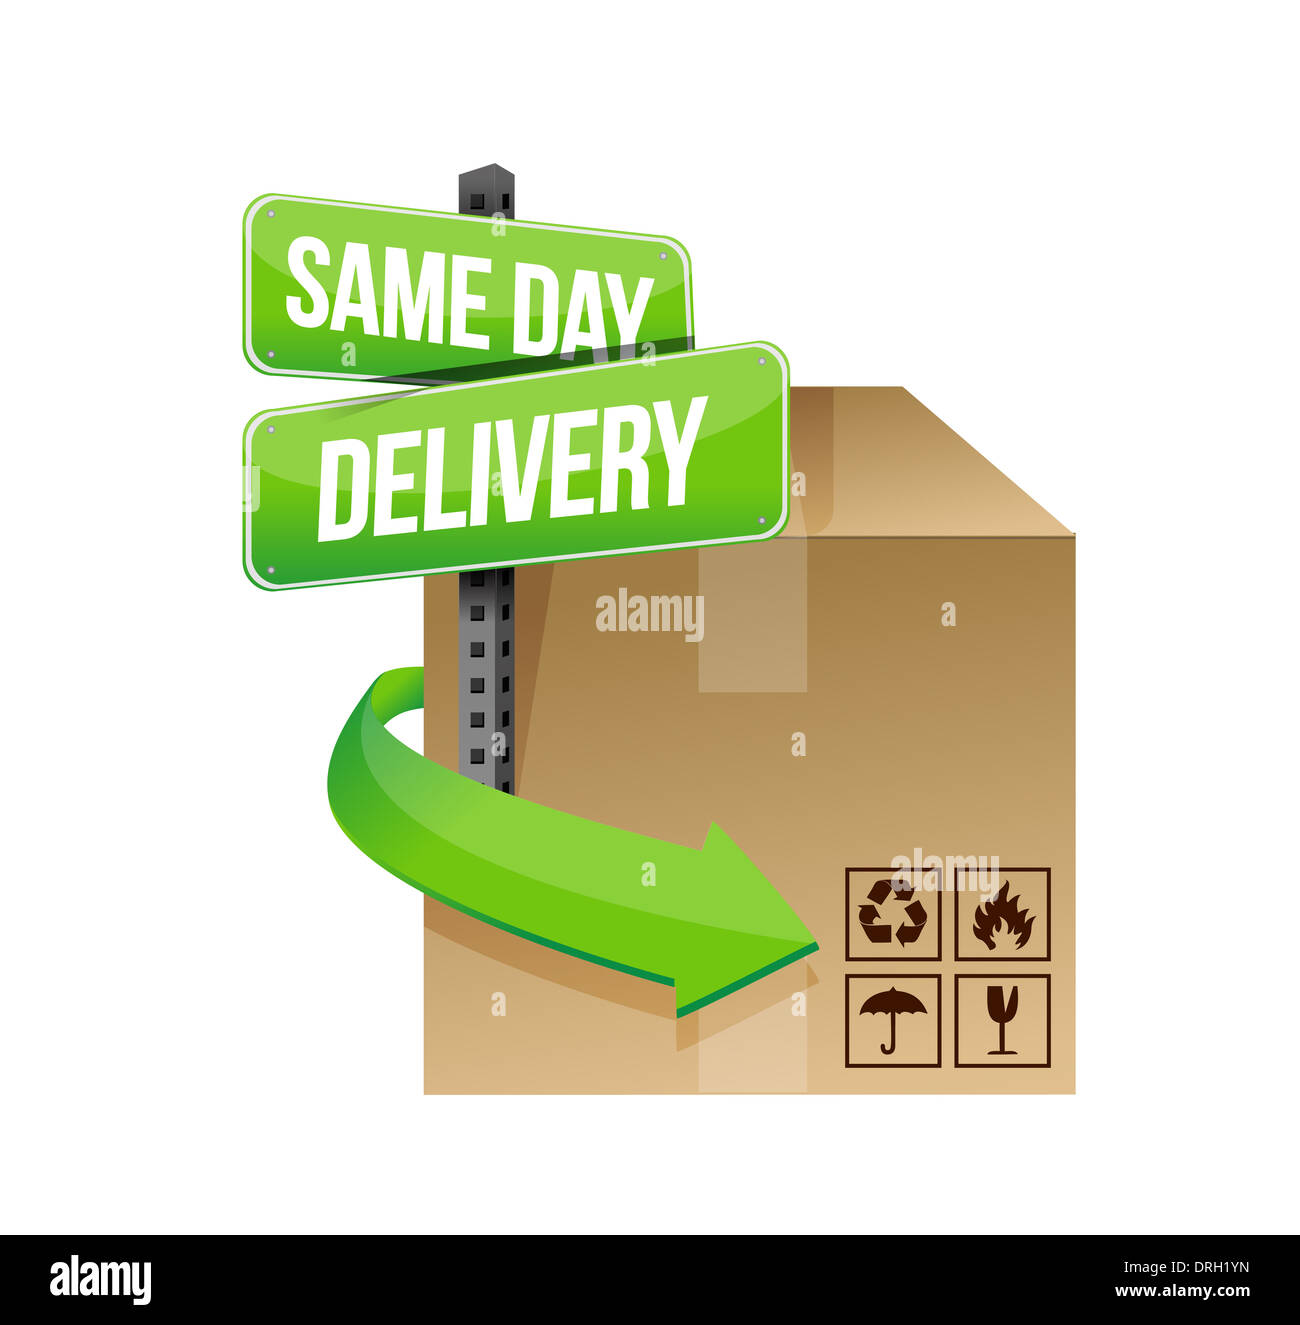 How to Get Same-Day or Next-Day Delivery on